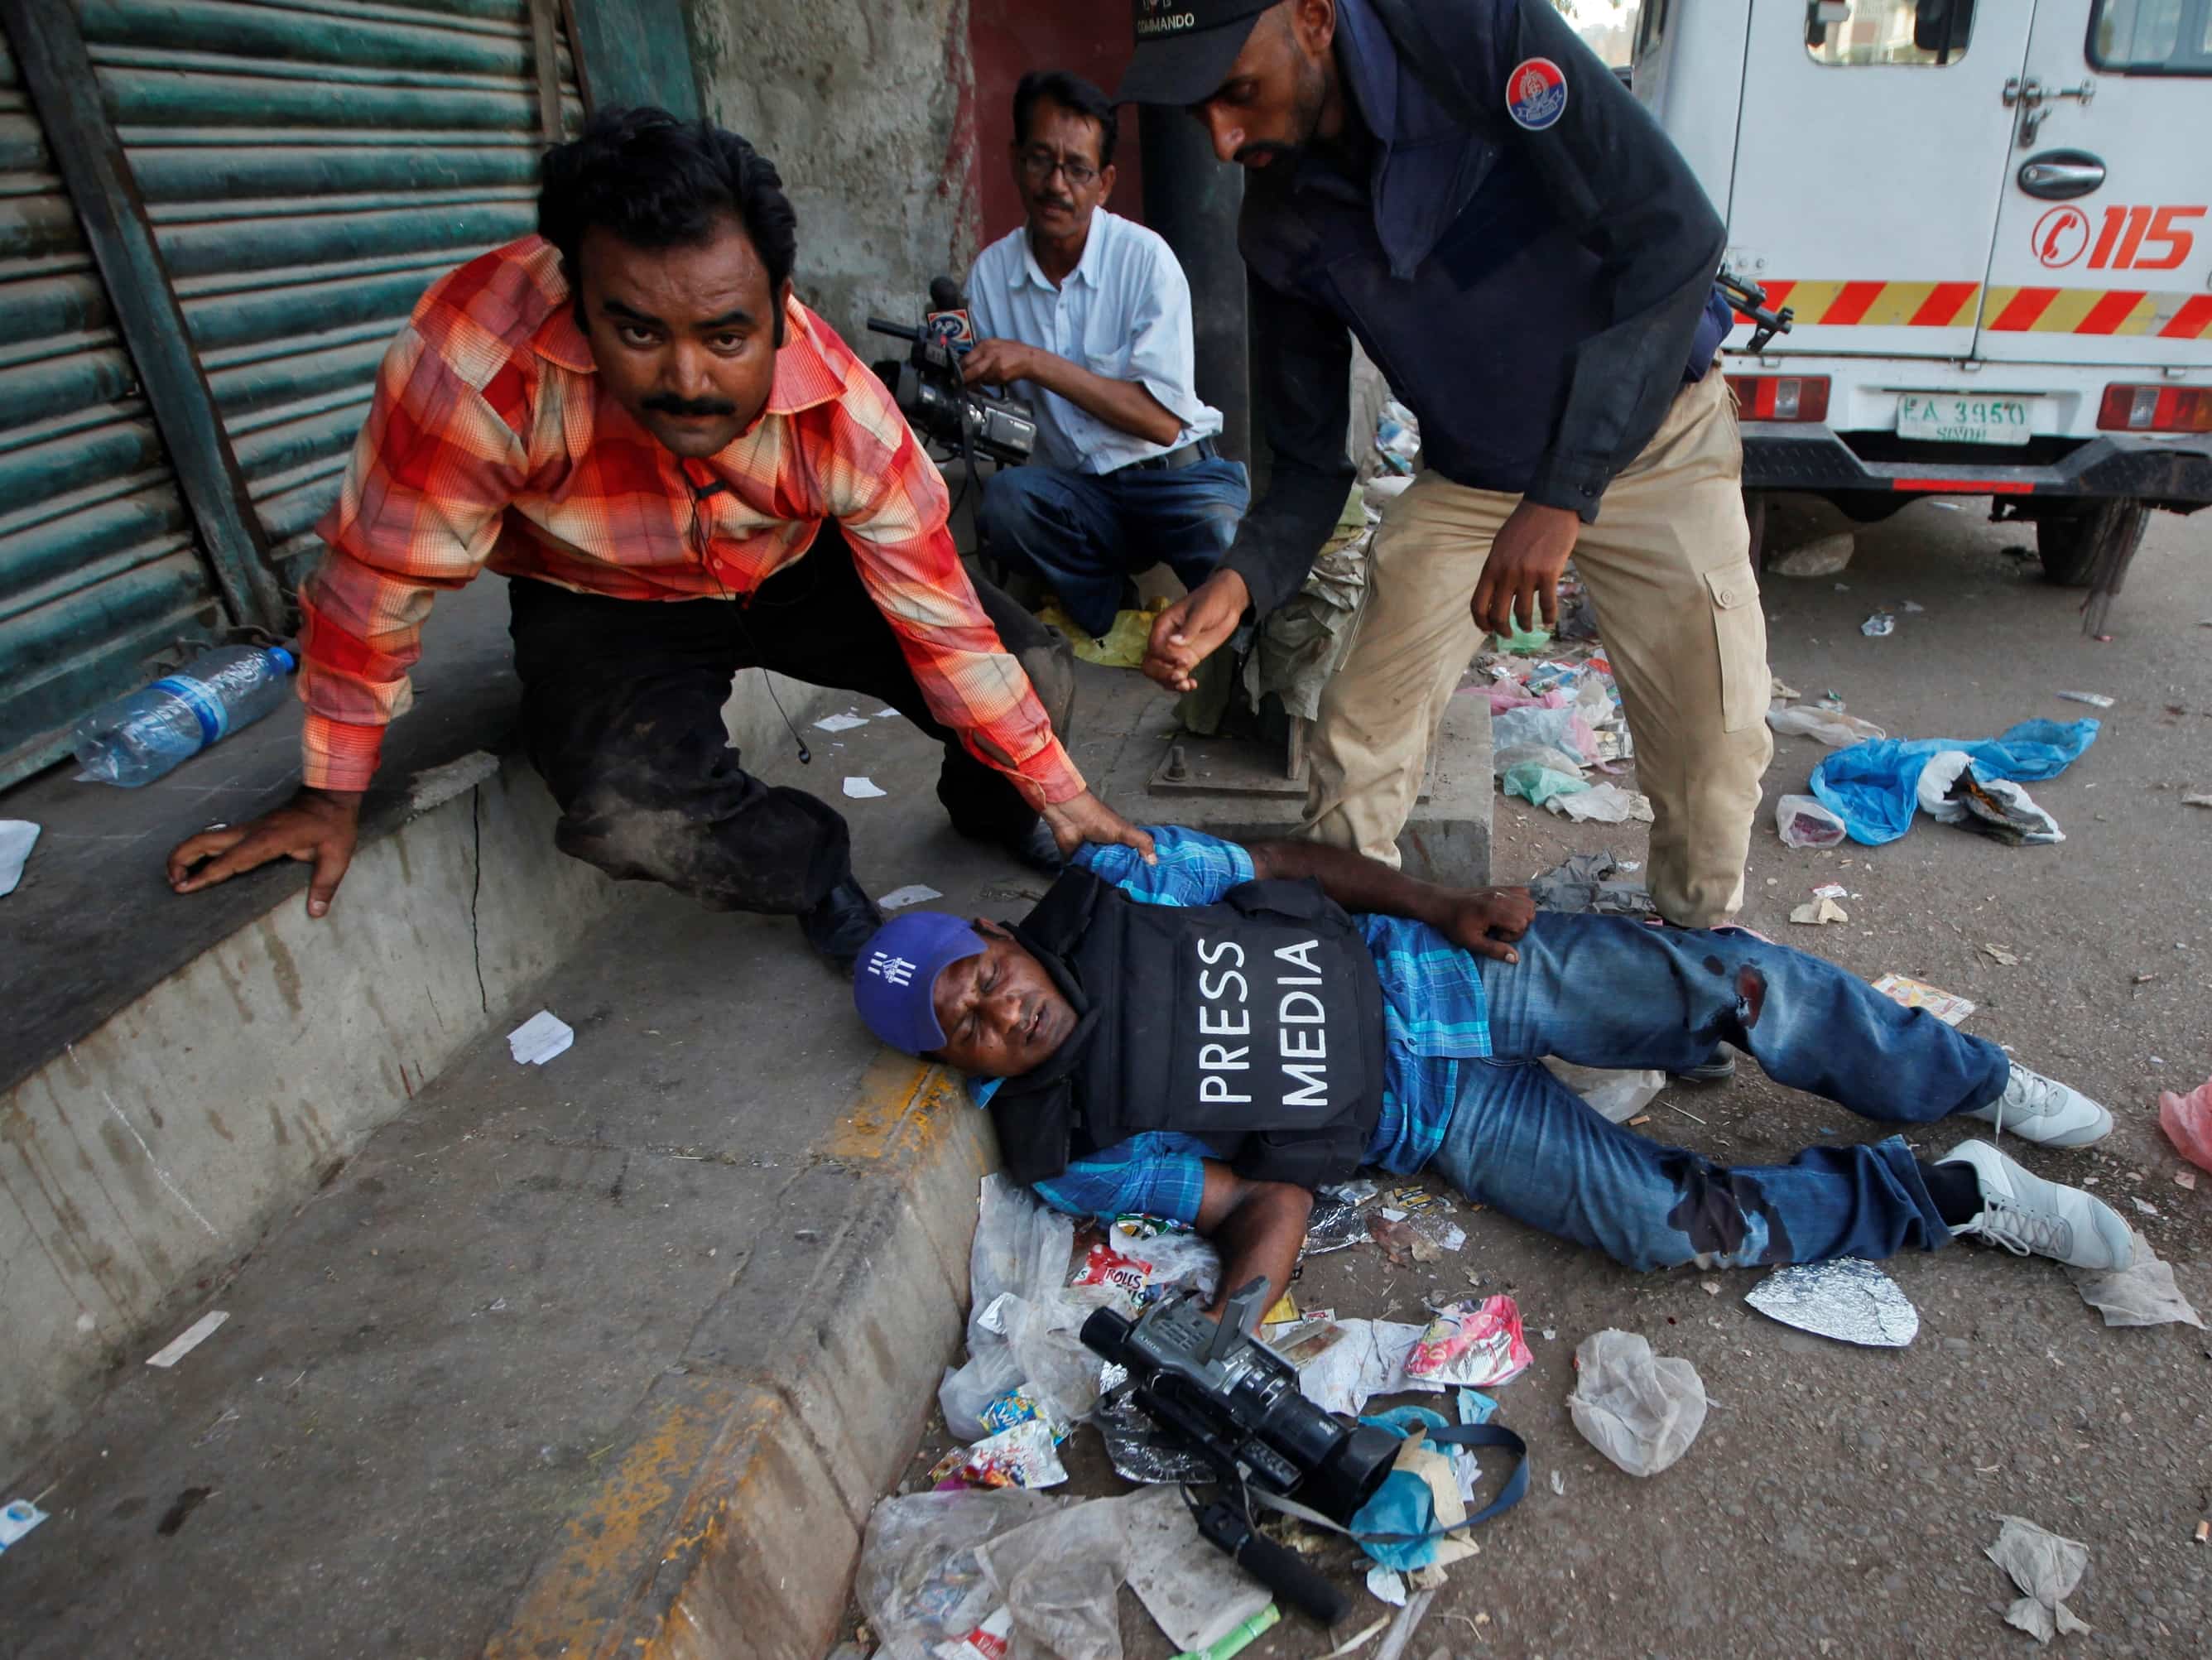 An injured Pakistani cameraman is attended to during a firefight in Karachi, April 2012. Photo features in CPJ's "The Year in Photographs" gallery, REUTERS/Athar Hussain